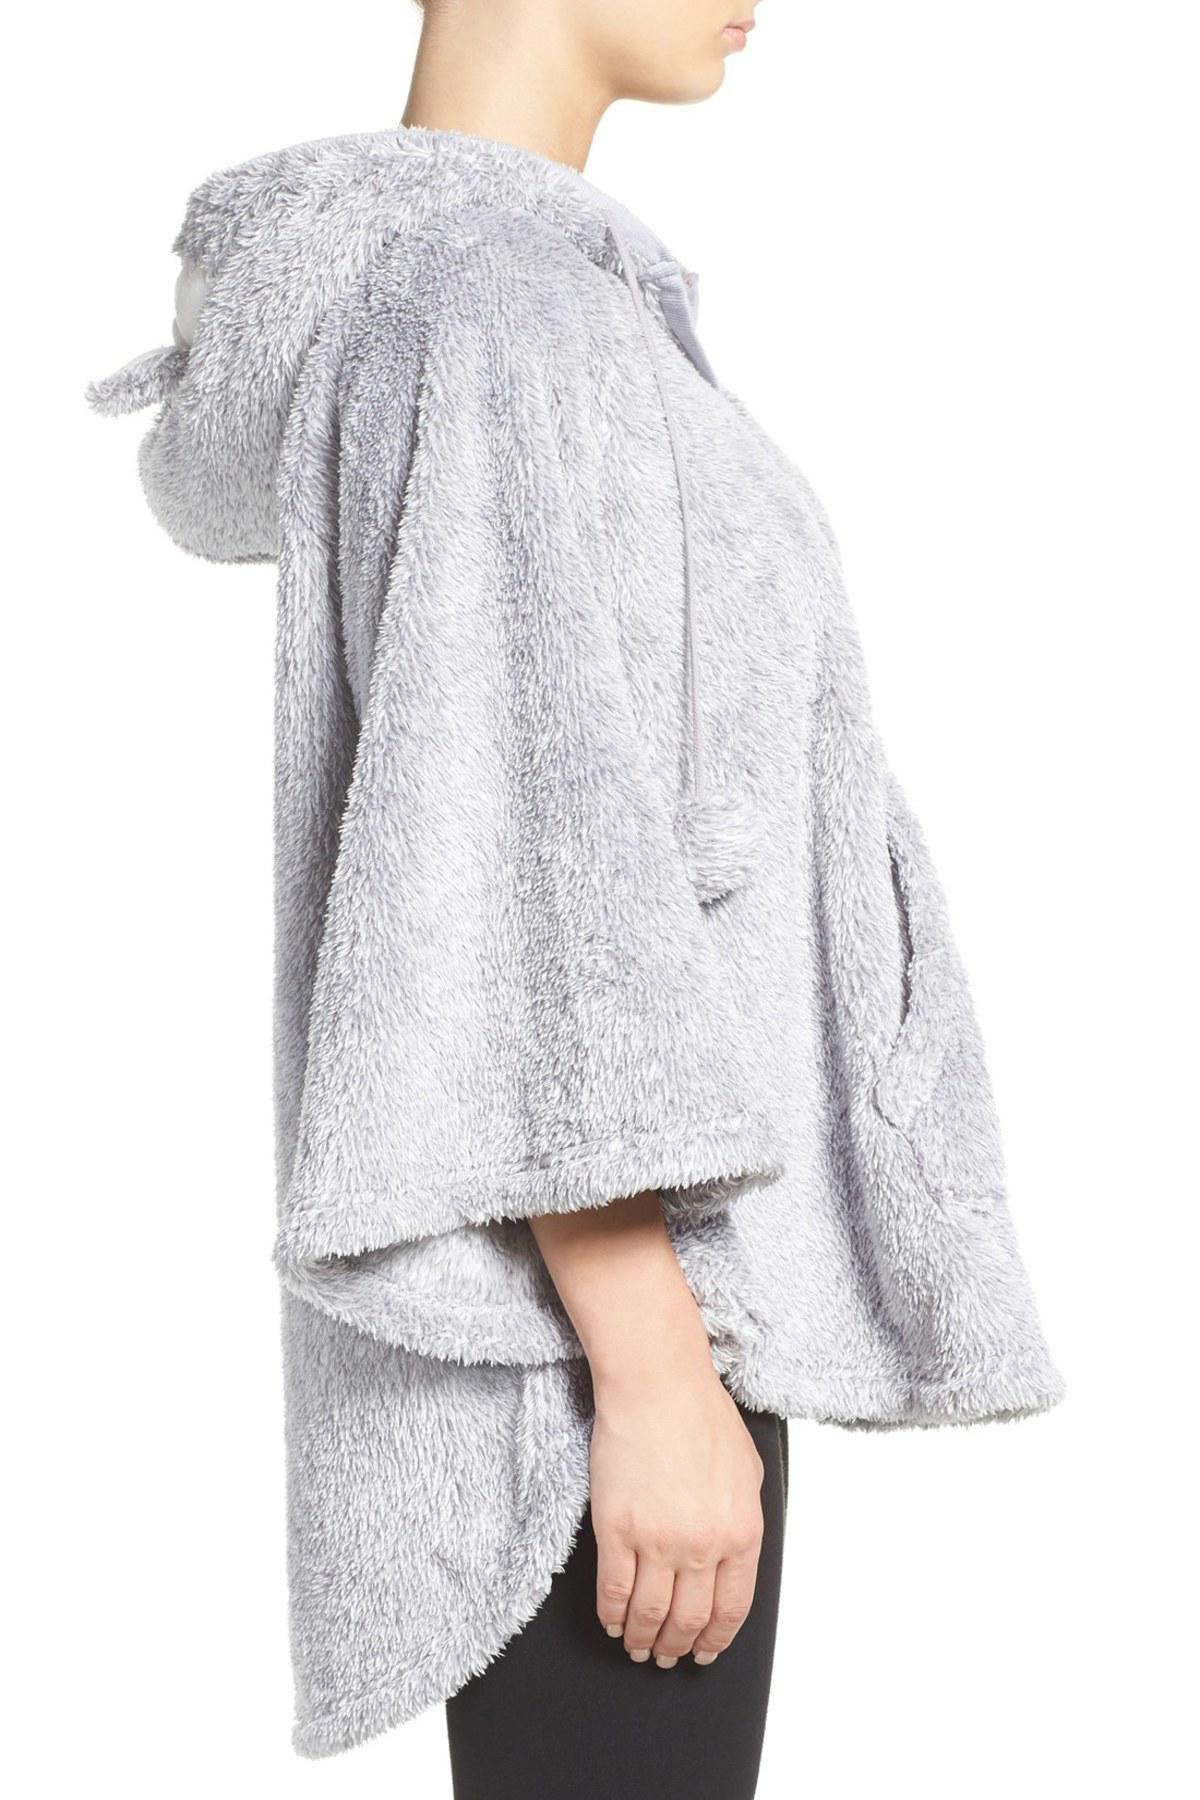 Cozy Zoe Synthetic Cuddle Lounge Poncho in Heather Grey (Gray) - Lyst